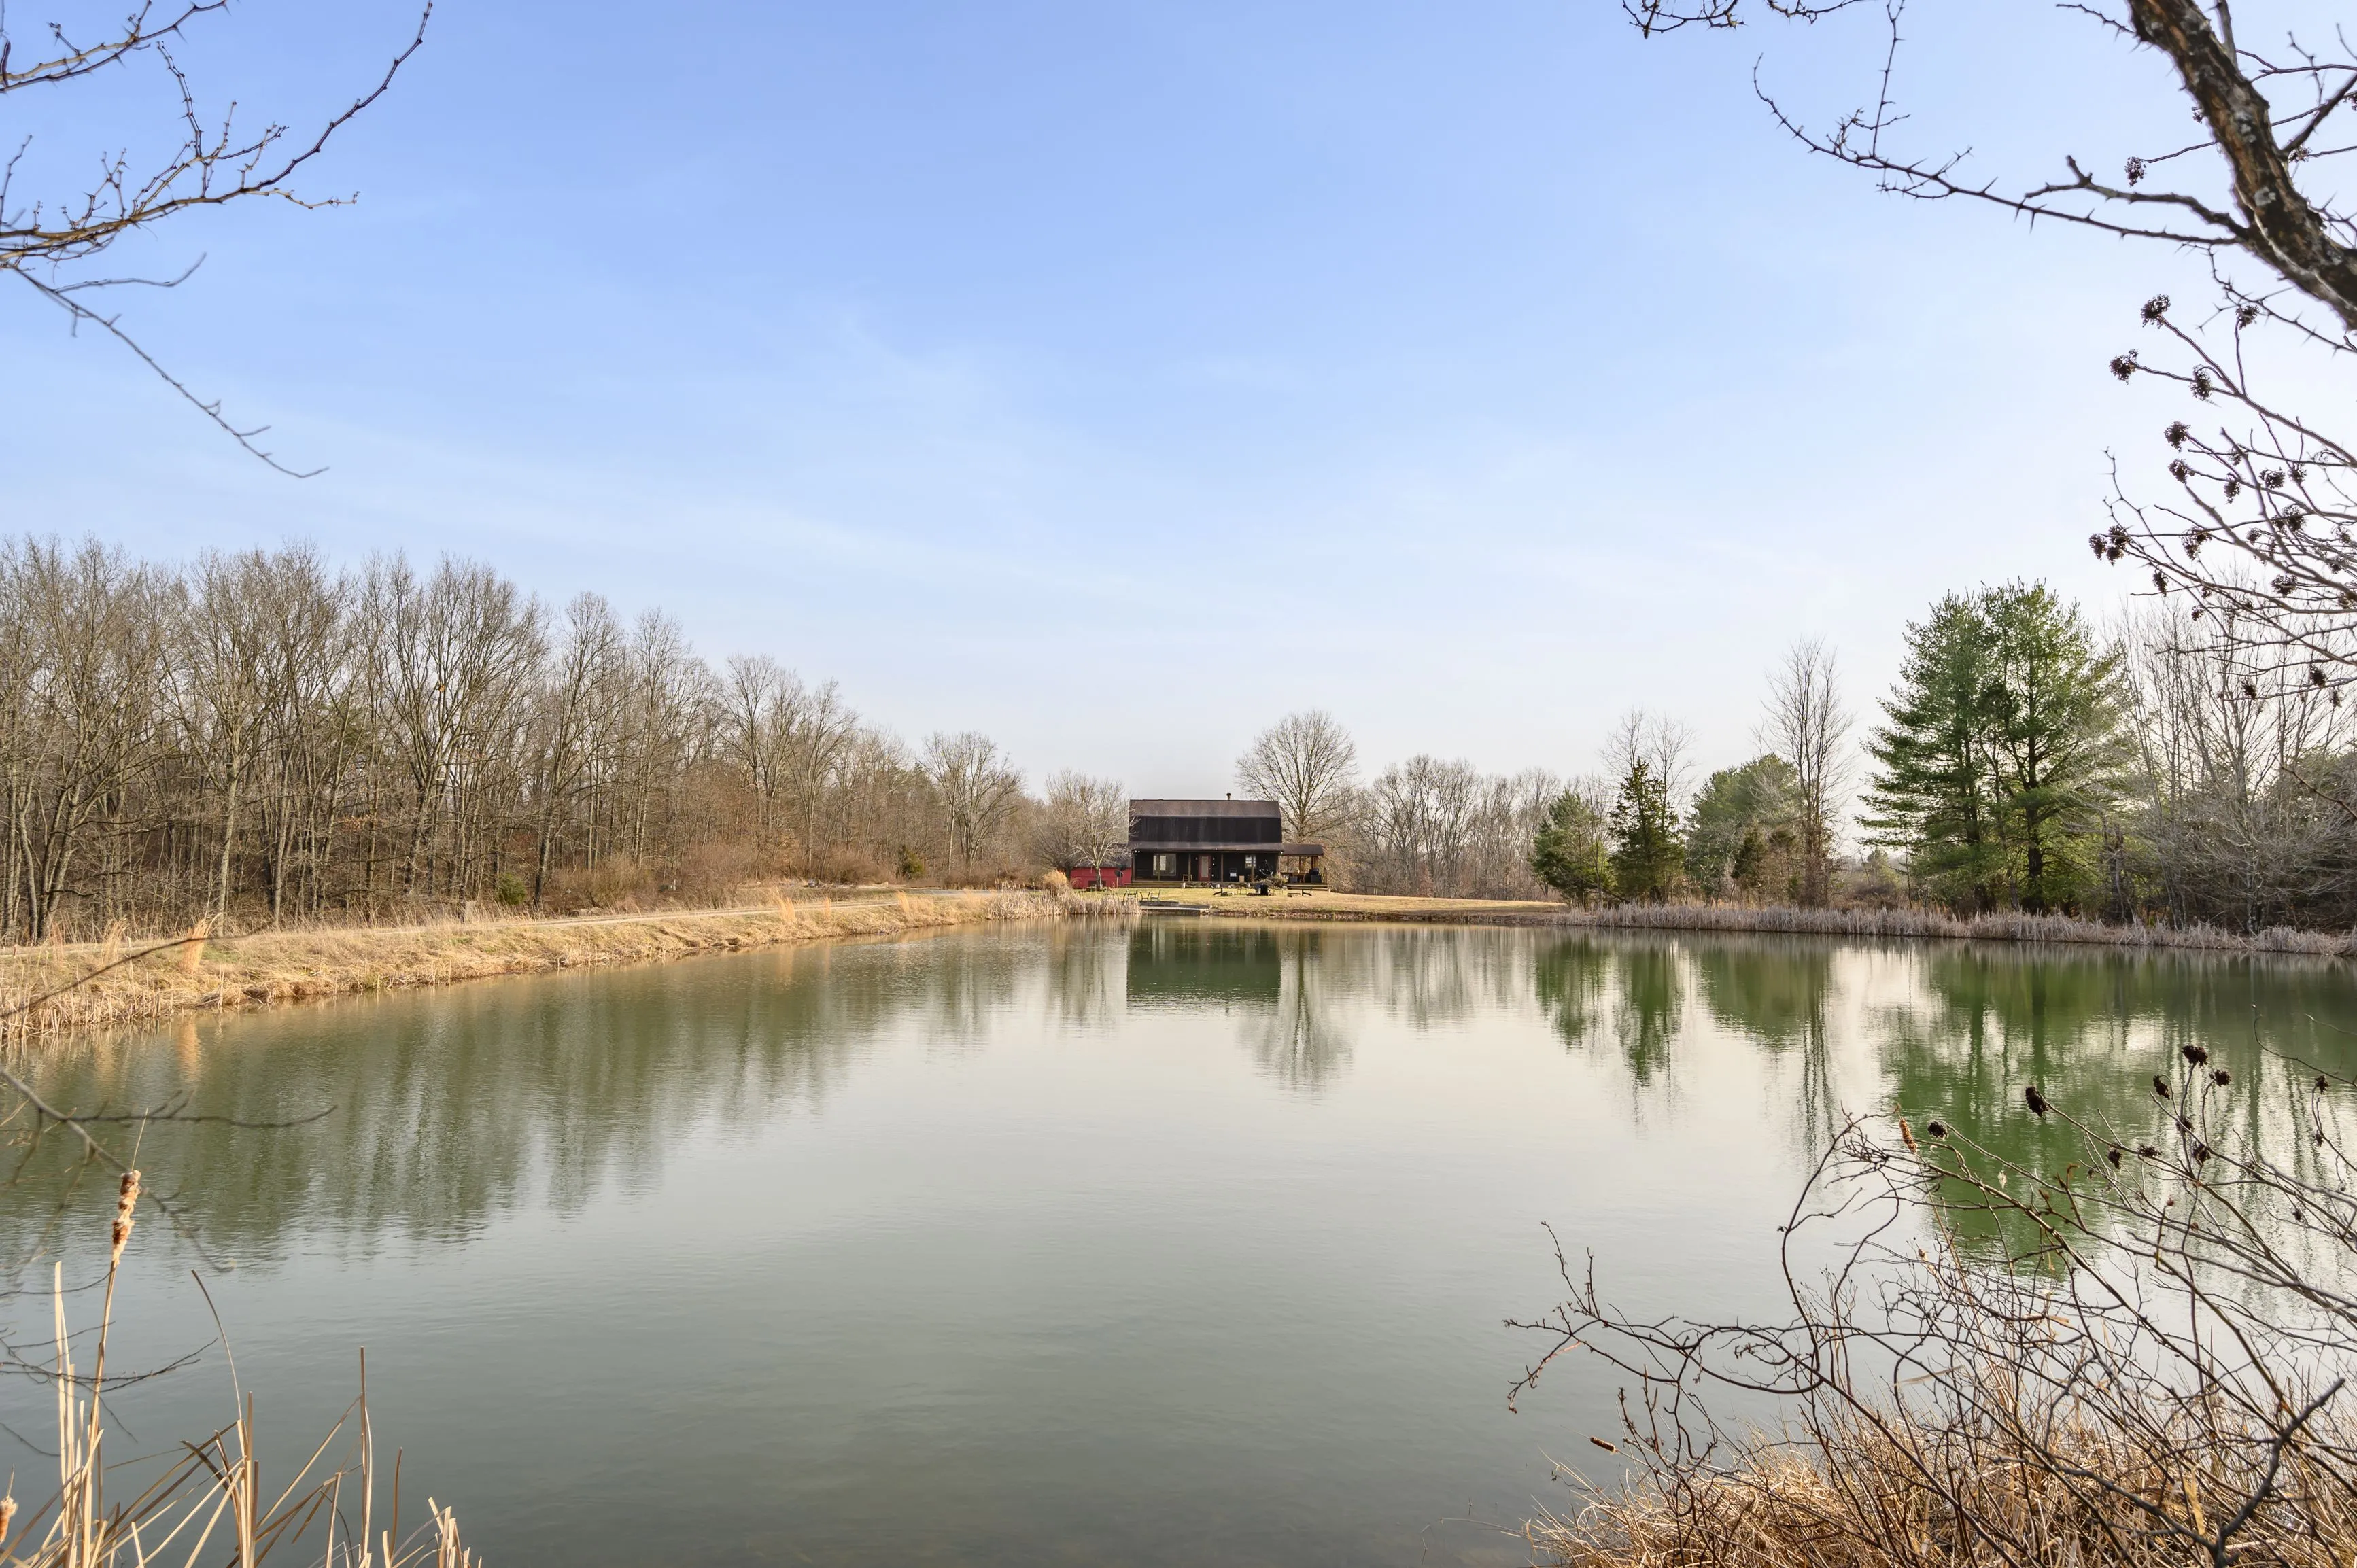 Tranquil country landscape featuring a pond with a reflection of the sky and trees, framed by bare branches in the foreground and a wooden house on the far shore.